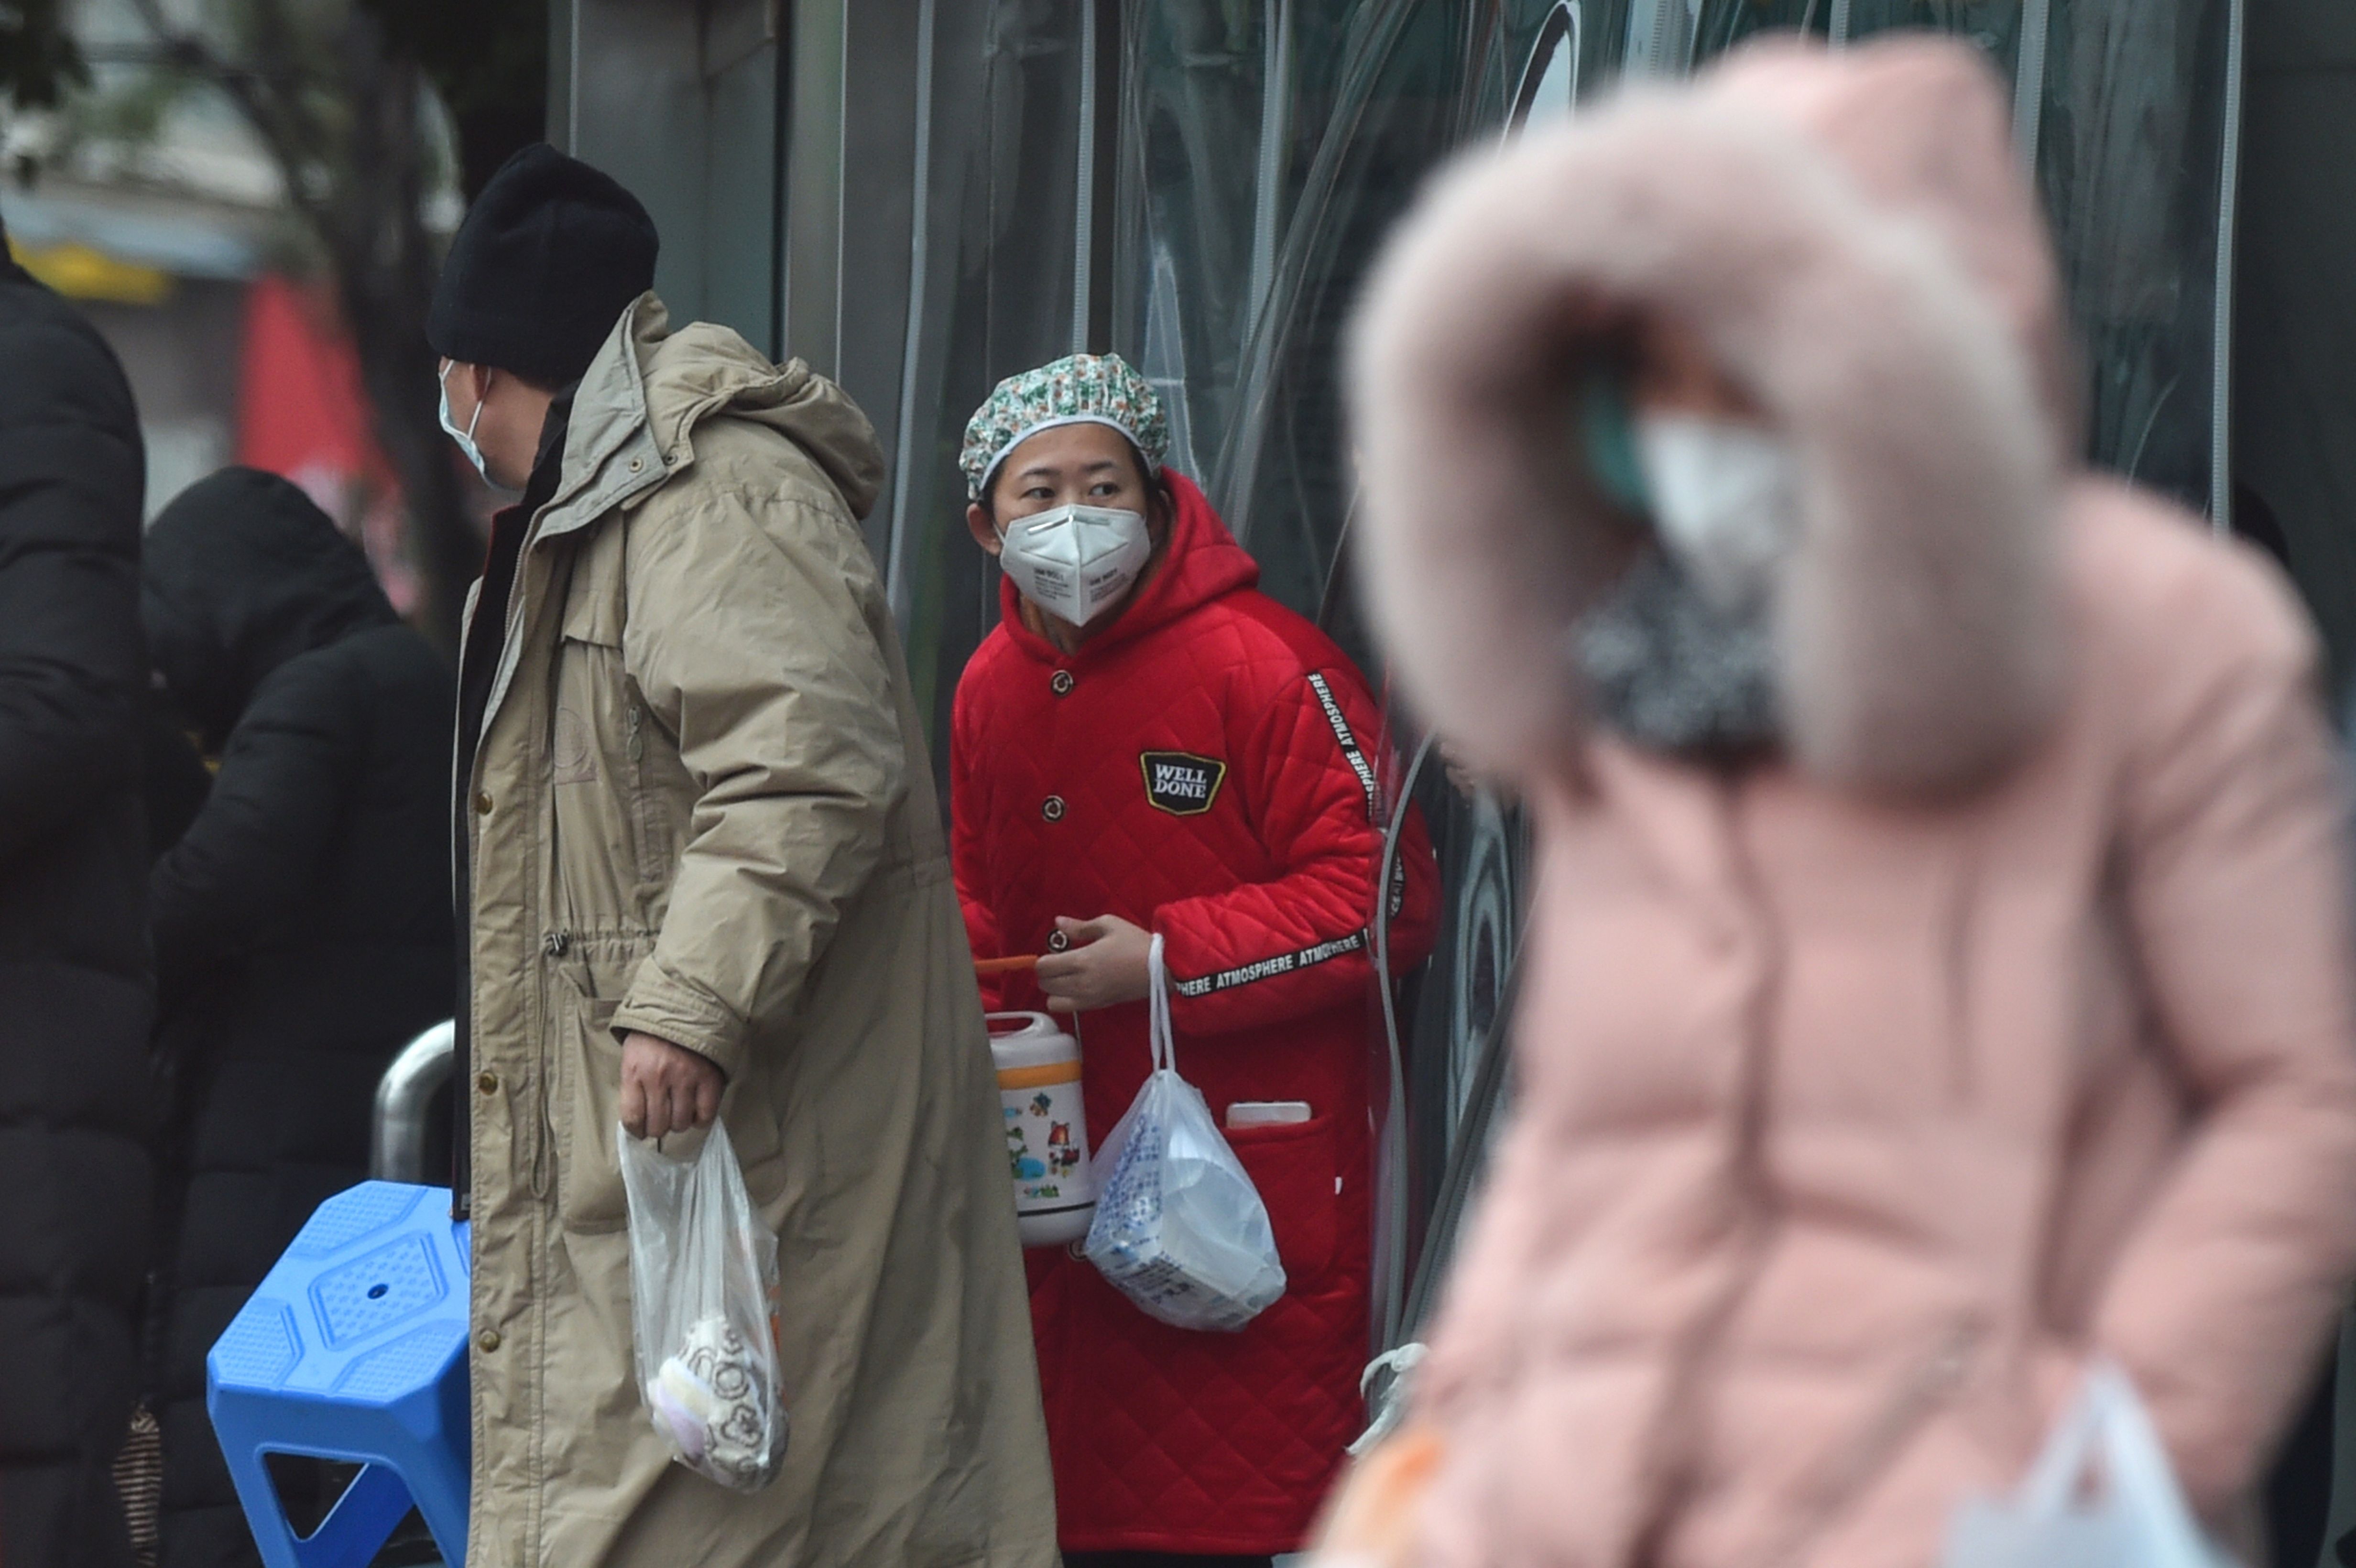 People wearing protective clothing to help stop the spread of a deadly virus stand on the street next to a hospital in Wuhan on January 24, 2020.